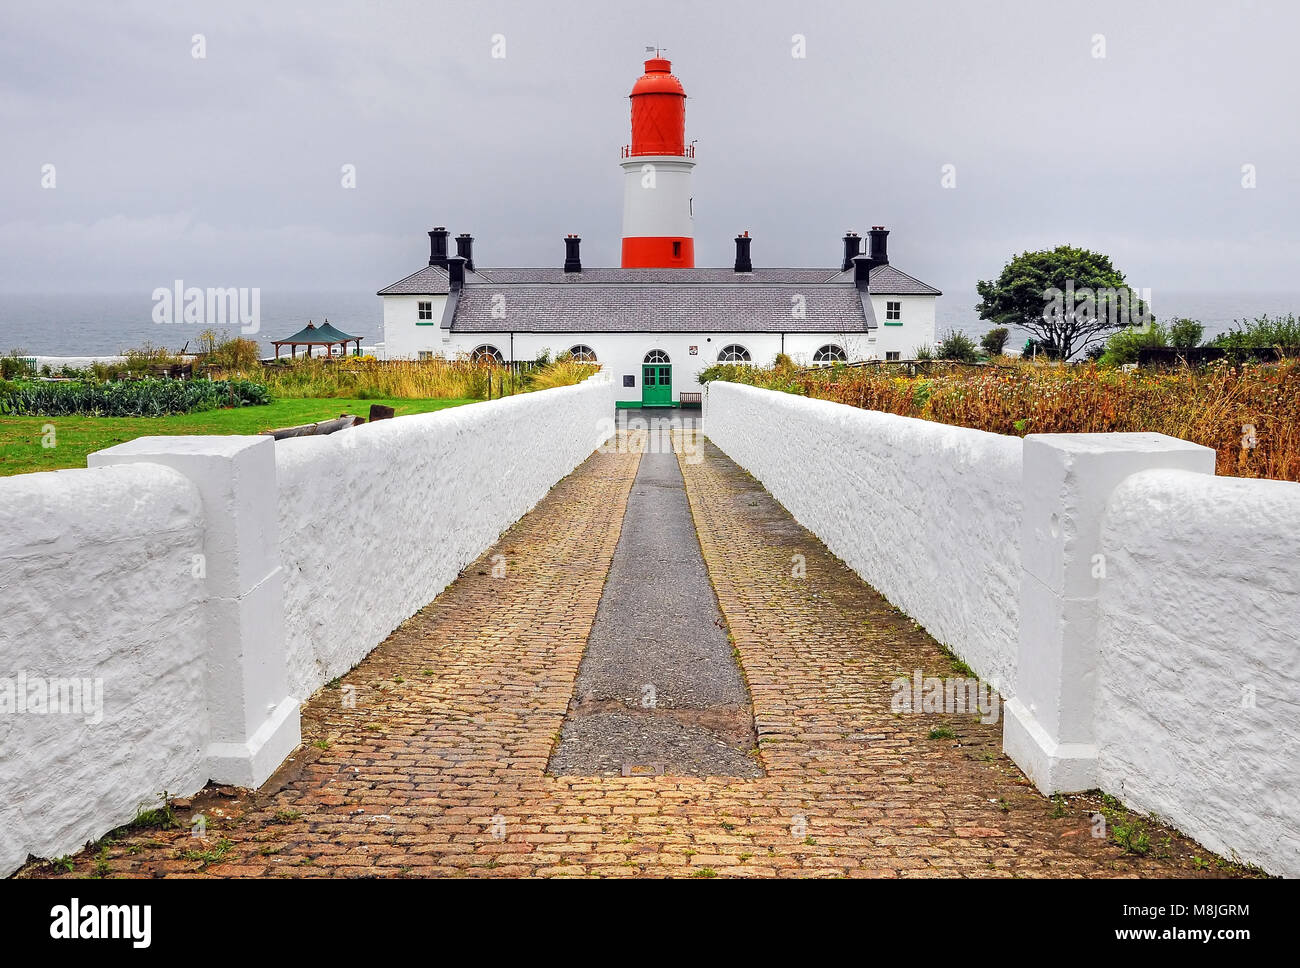 Souter Lighthouse (grid reference NZ408642) is a lighthouse located in the village of Marsden in South Shields, Tyne & Wear, England. Stock Photo